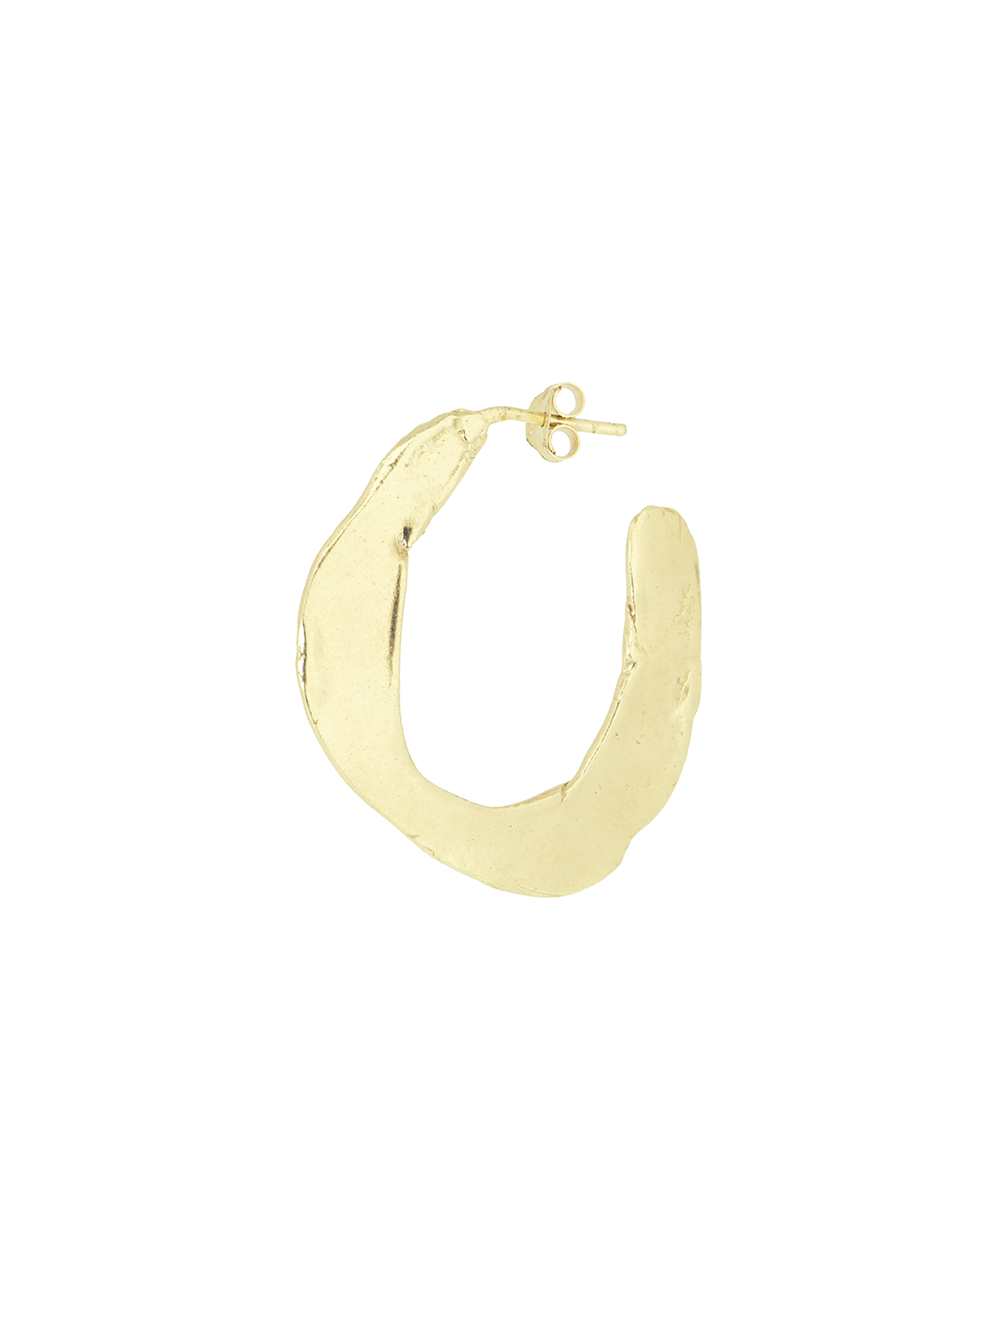 My type | 14K Gold Plated